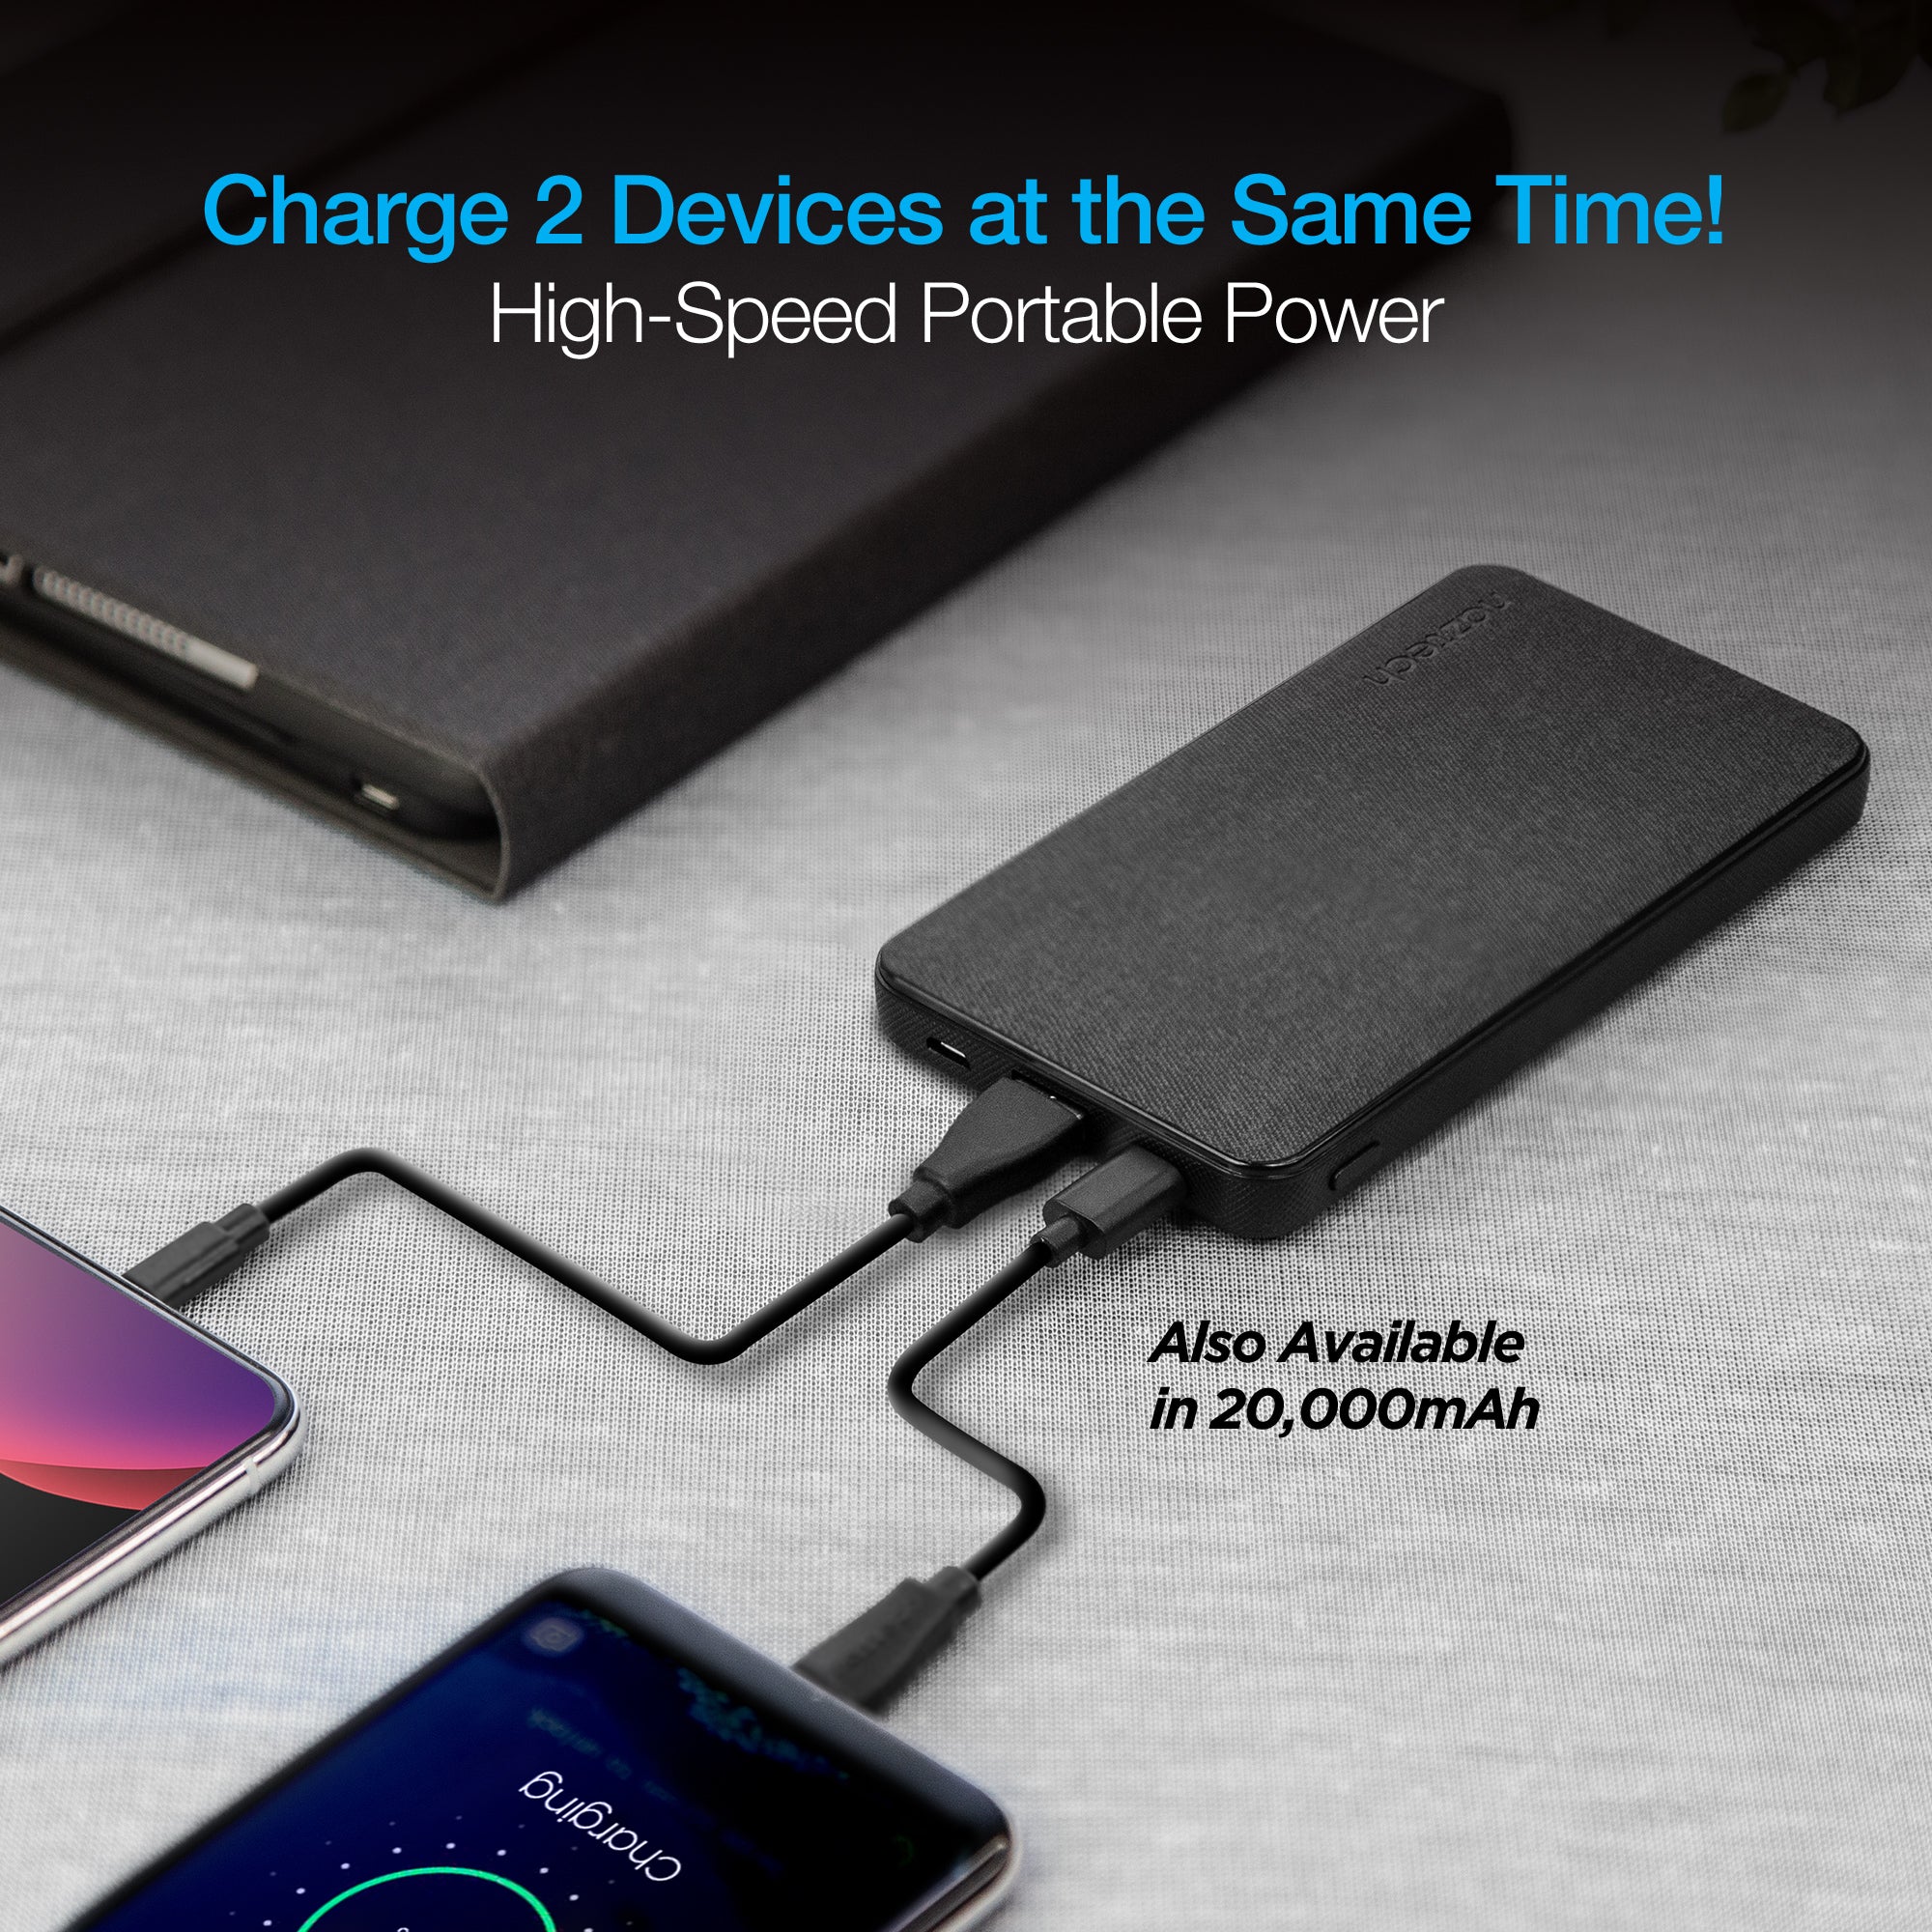 10,000mAh Fast Fabric Power with 18W USB-C PD Quick Charge 3.0 | Naztech – Naztech.com